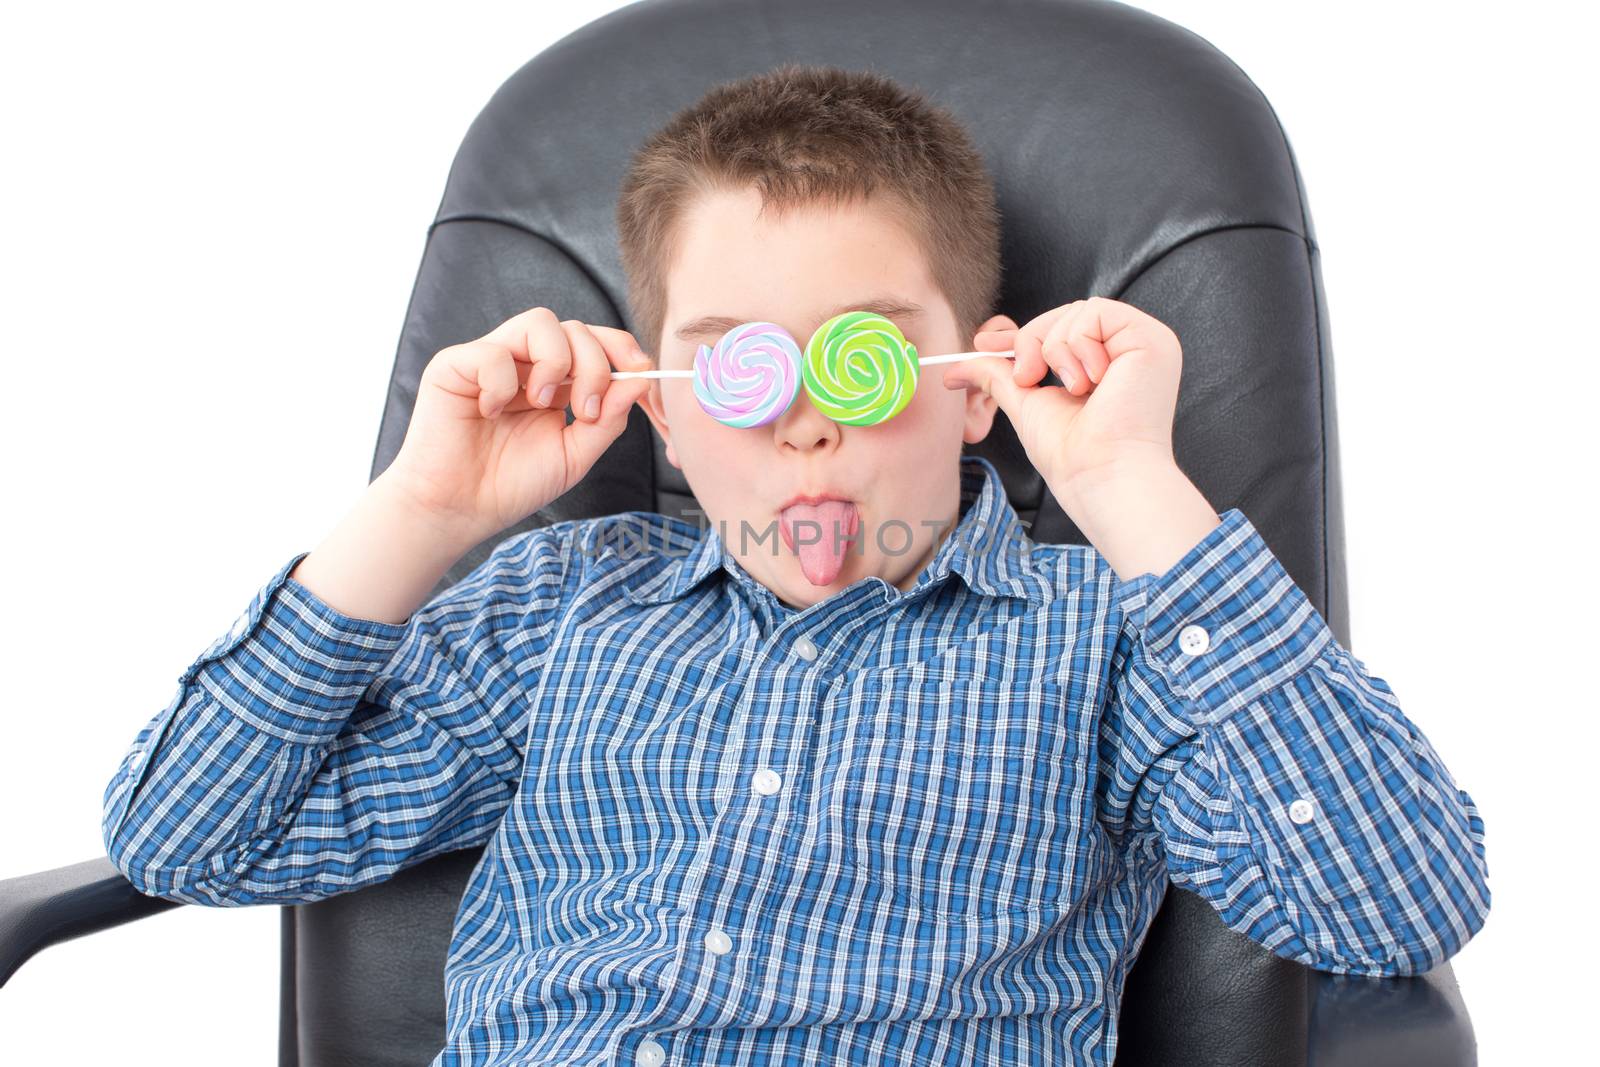 Close up Funny White Boy in Checkered Shirt, Sitting on an Office Chair and Holding Lollipops Over his Two Eyes with Tongue Out. Isolated on White.